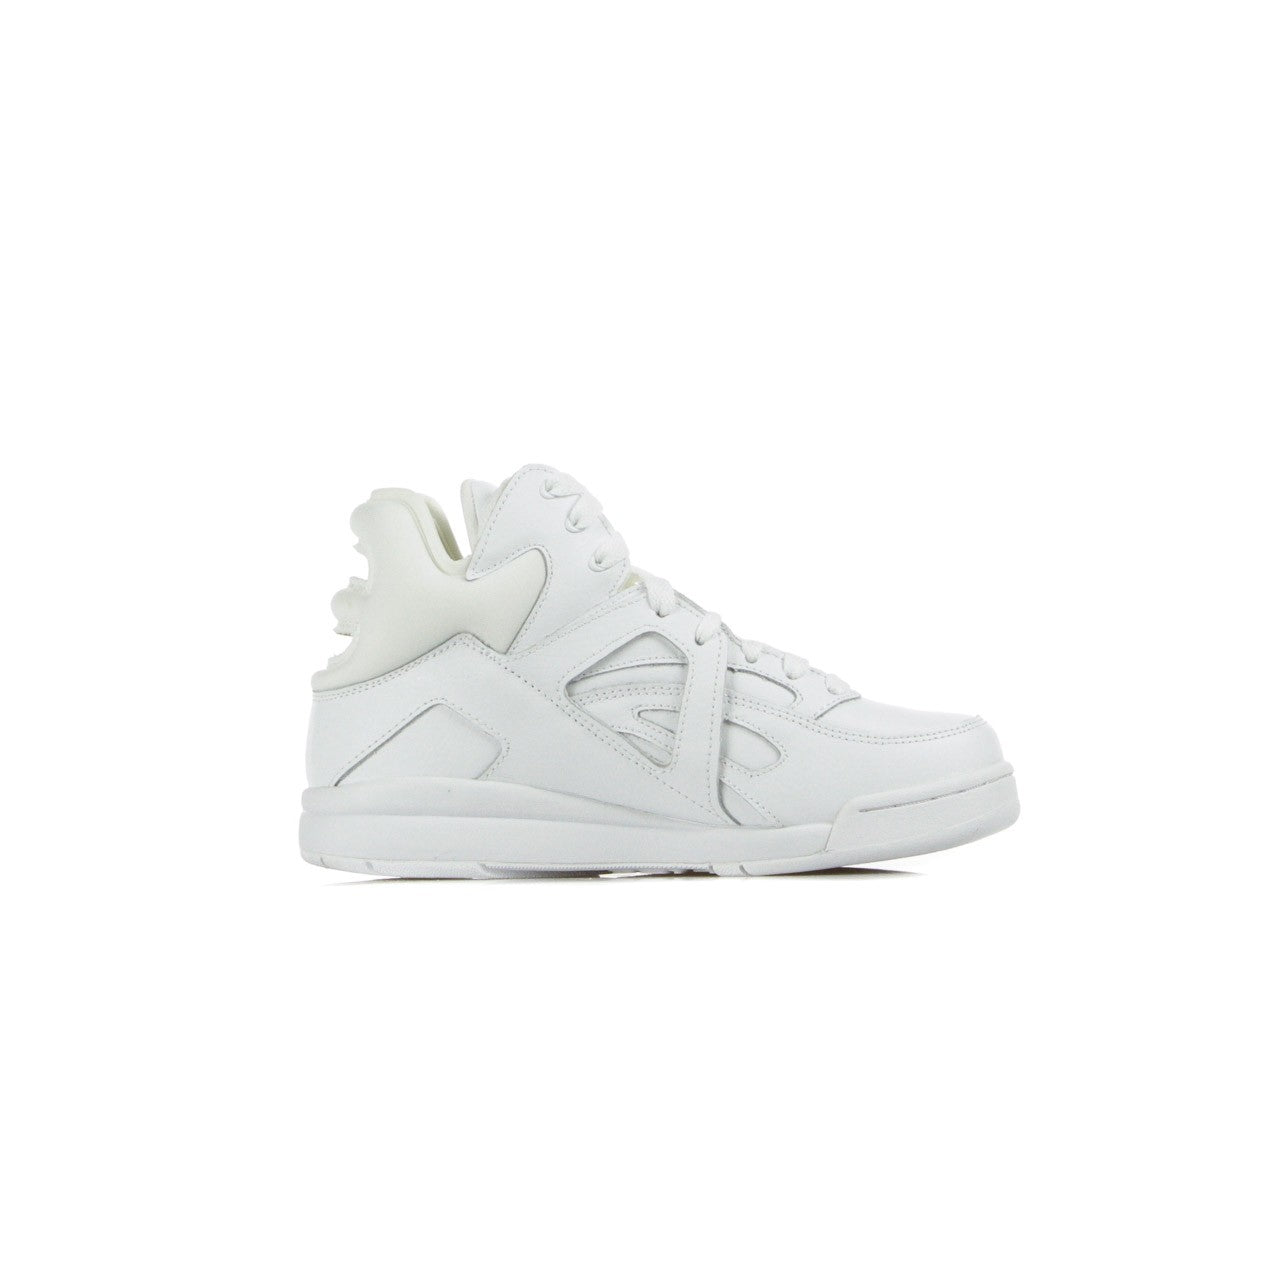 High Women's Shoe Cage Mid Wmn White